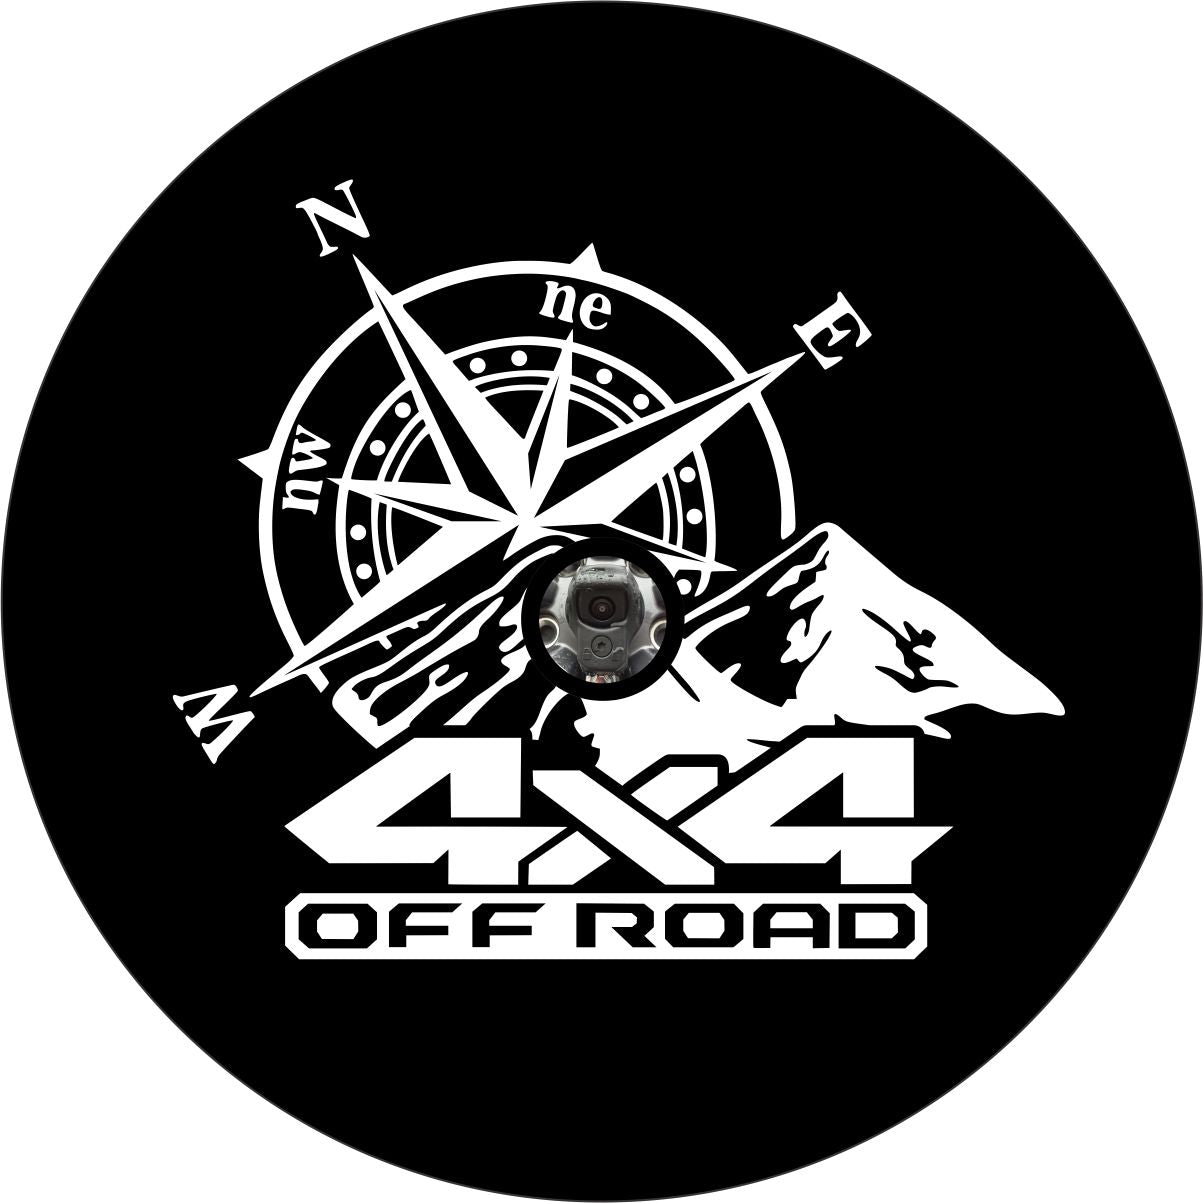 A spare tire cover design of a large compass, mountains, and the saying 4x4 off road across the bottom with a hole for spare wheels that have a backup camera installed